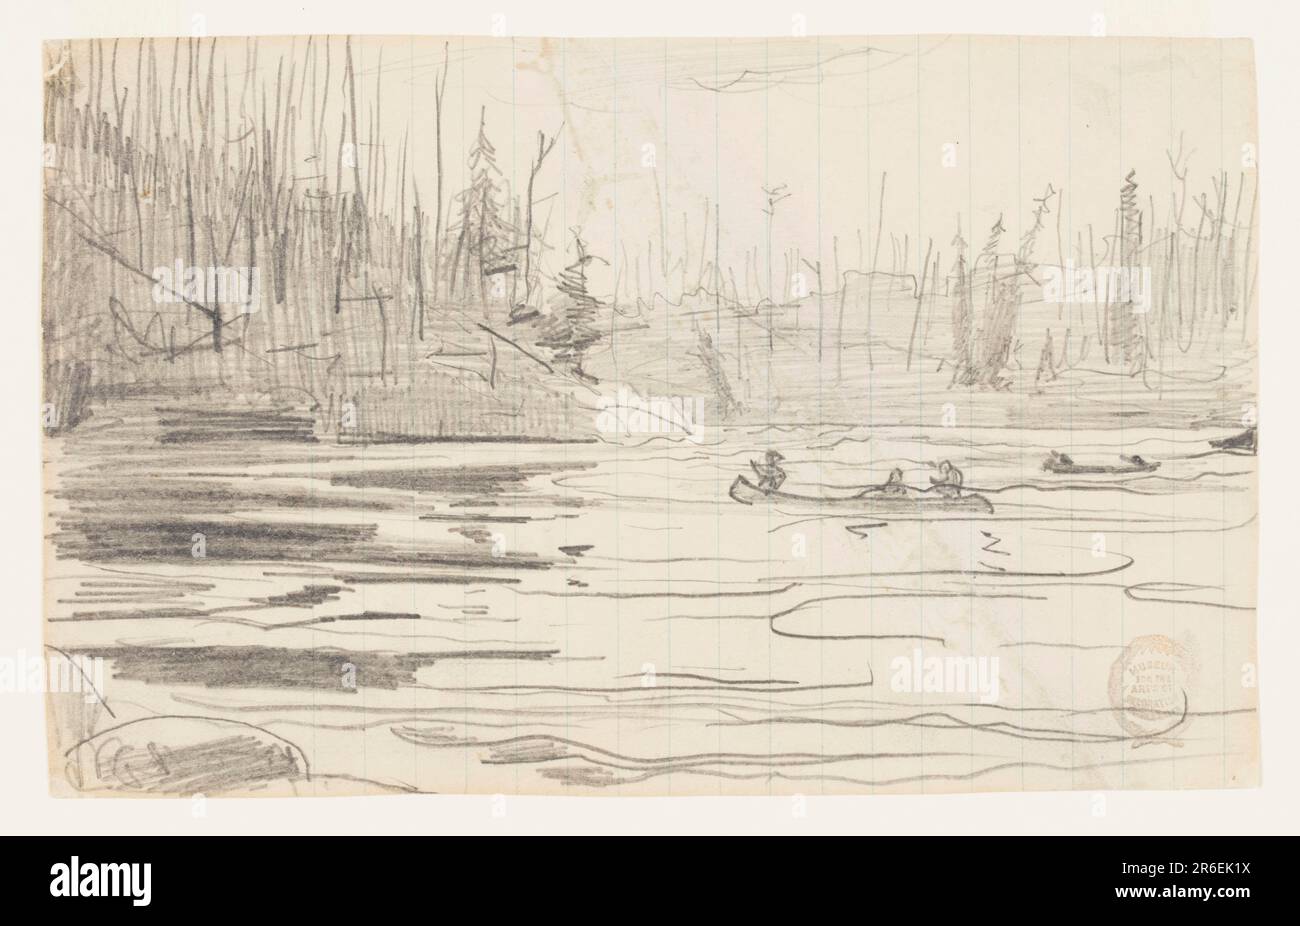 Sketch of canoes on a lake with trees in the distance. Graphite on paper. Date: 1897. Museum: Cooper Hewitt, Smithsonian Design Museum. Stock Photo